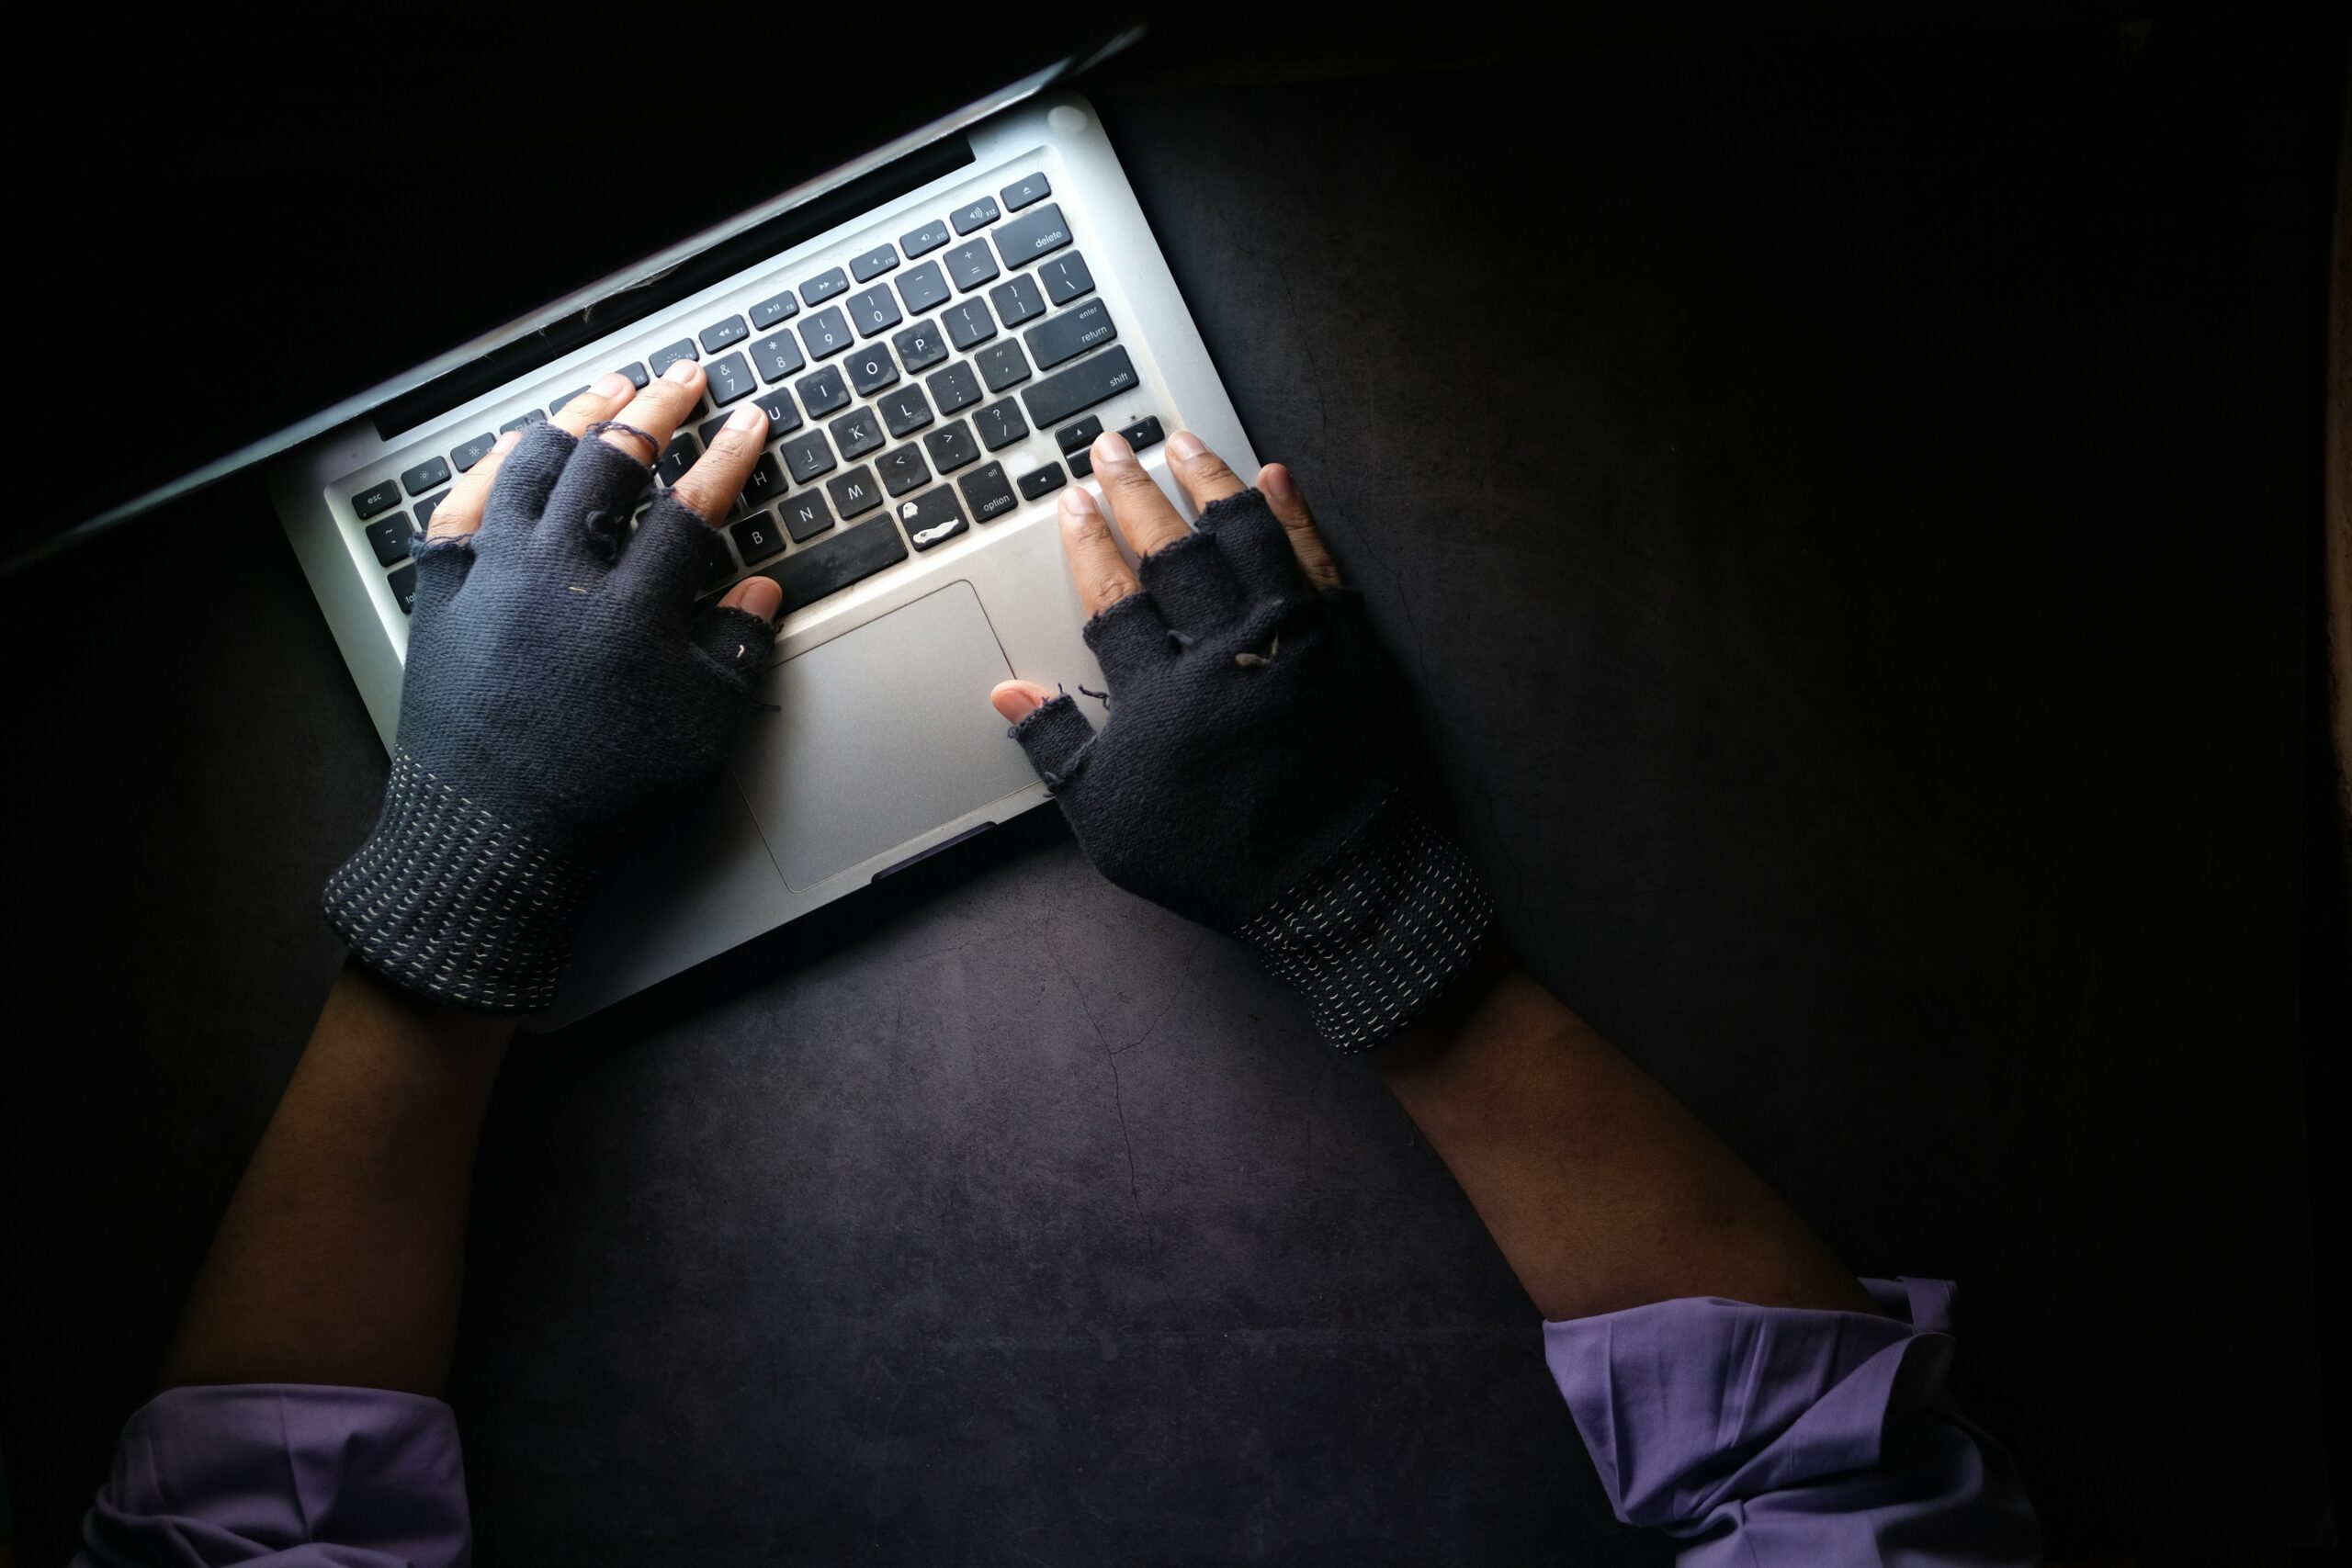 A person wearing gloves typing on a laptop in a mean and menacing manner, possibly engaged in a cyberattack.